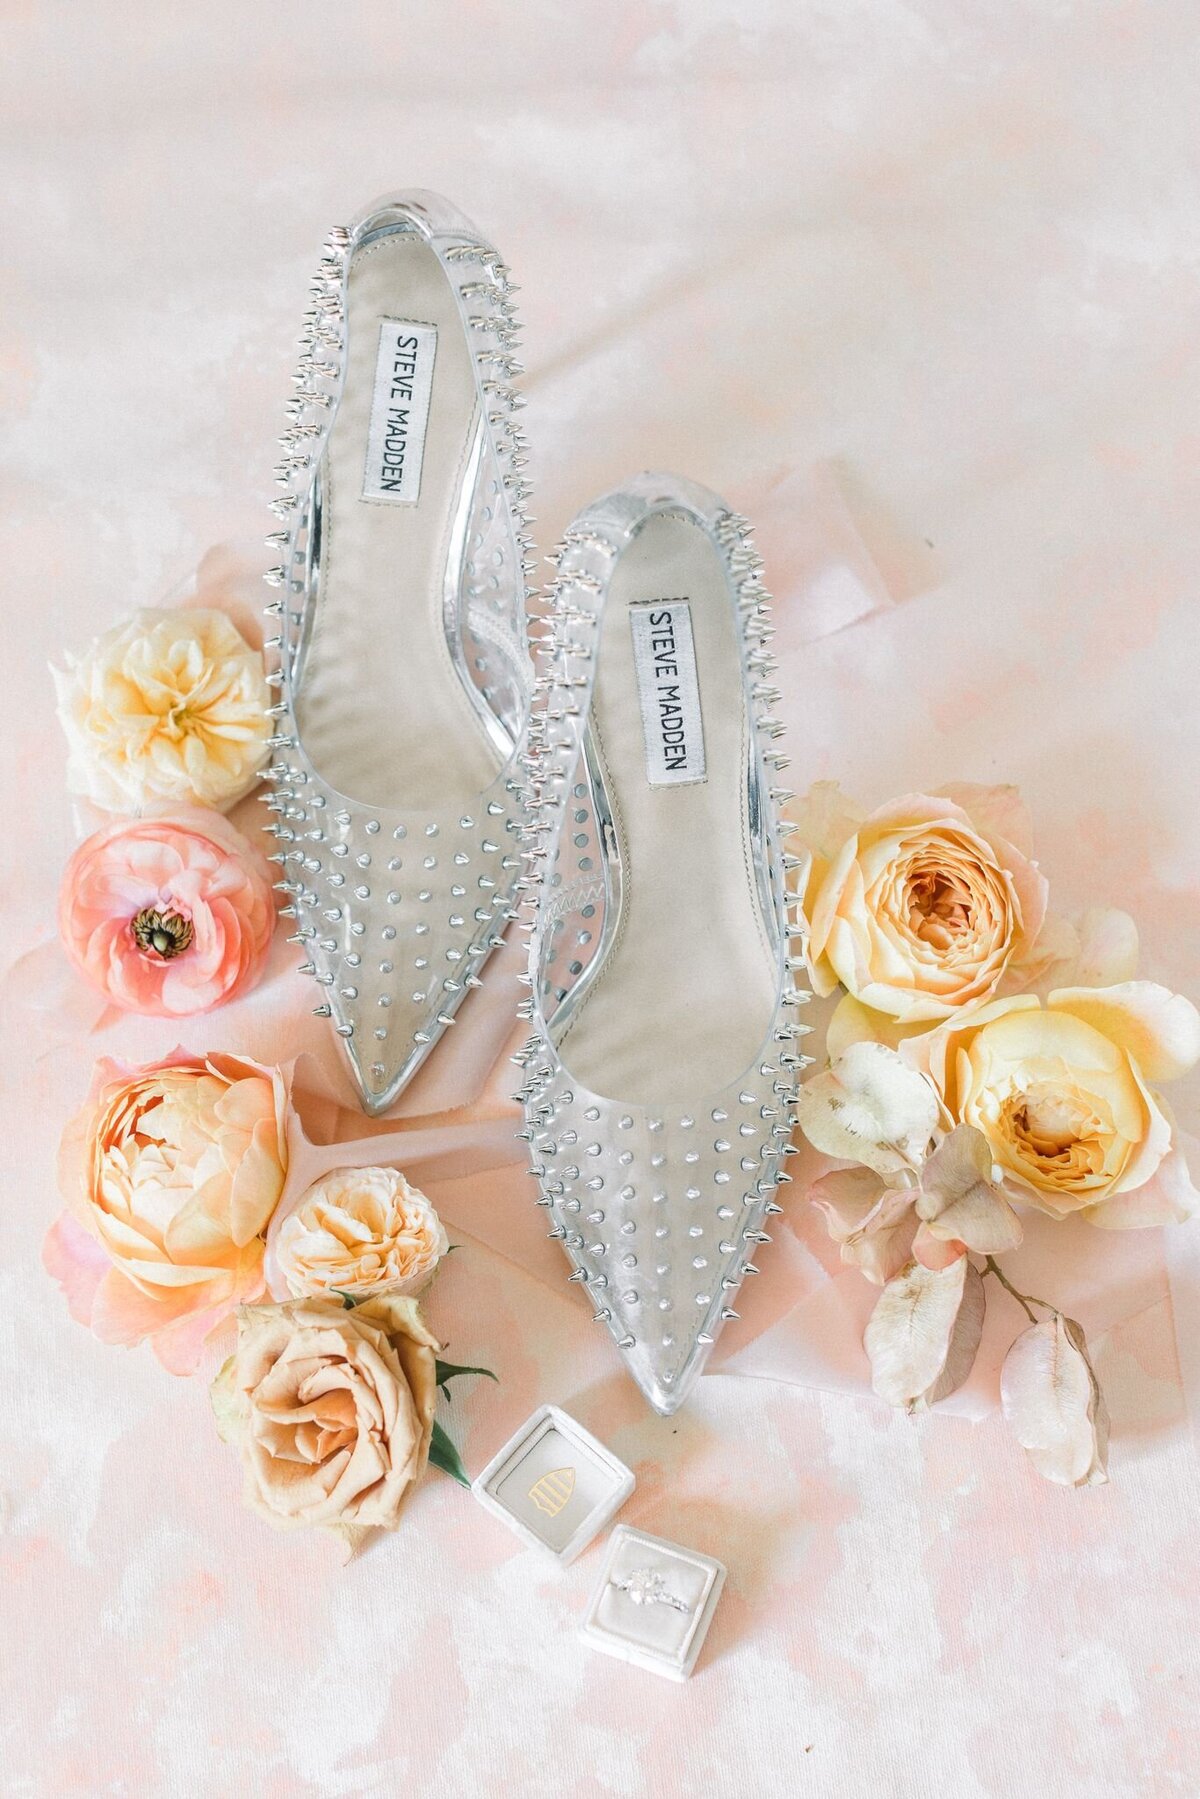 Yellow and pink flowers surround the bride's shoes.